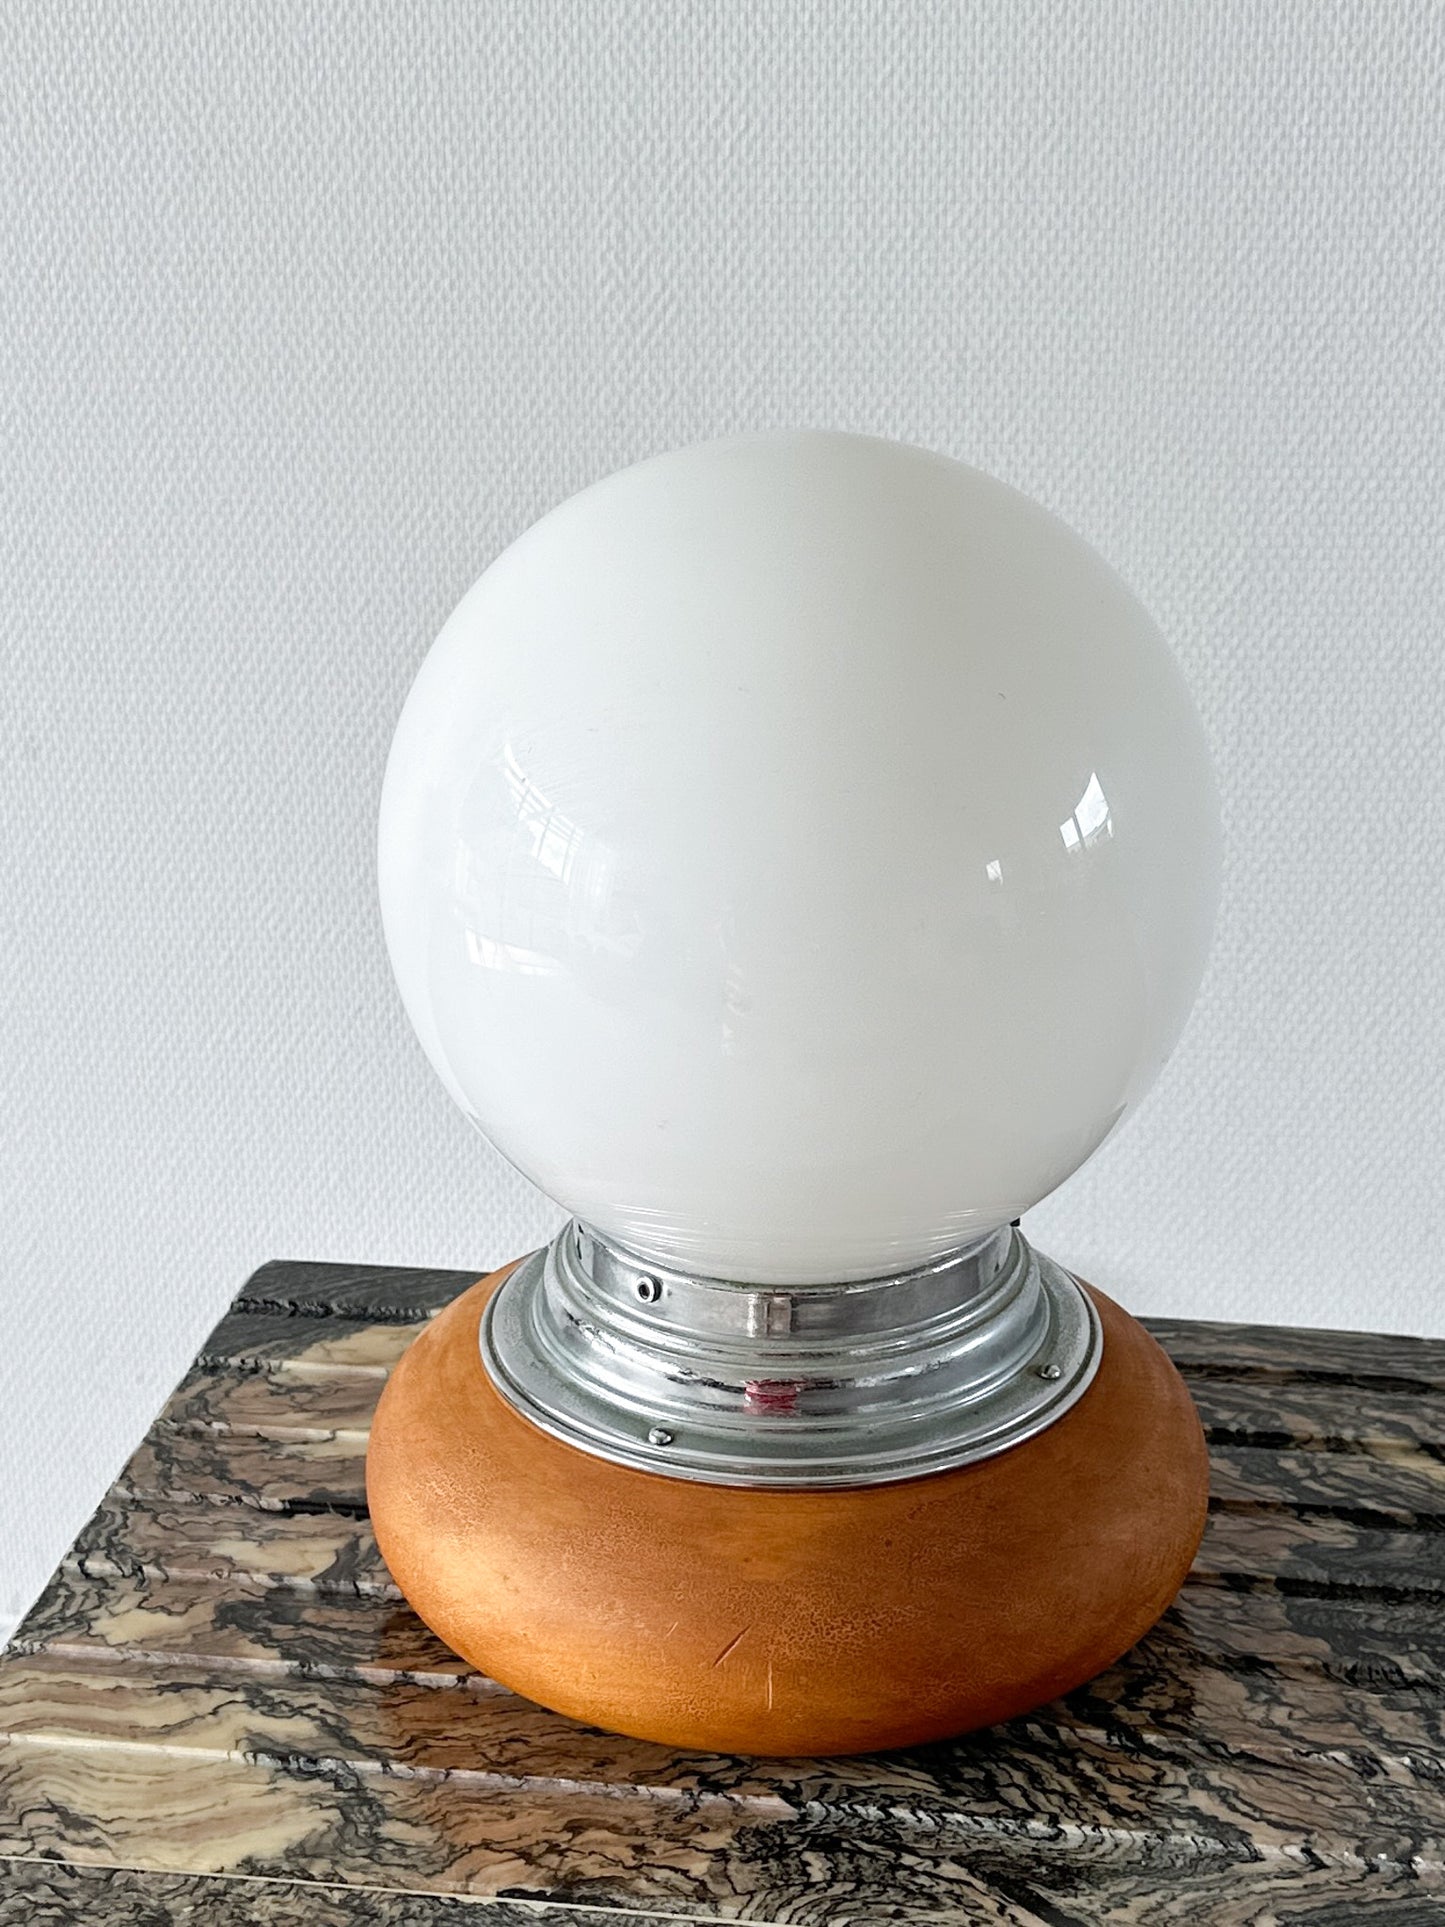 Art Deco Globe Table Lamp with Chrome and Wooden Base